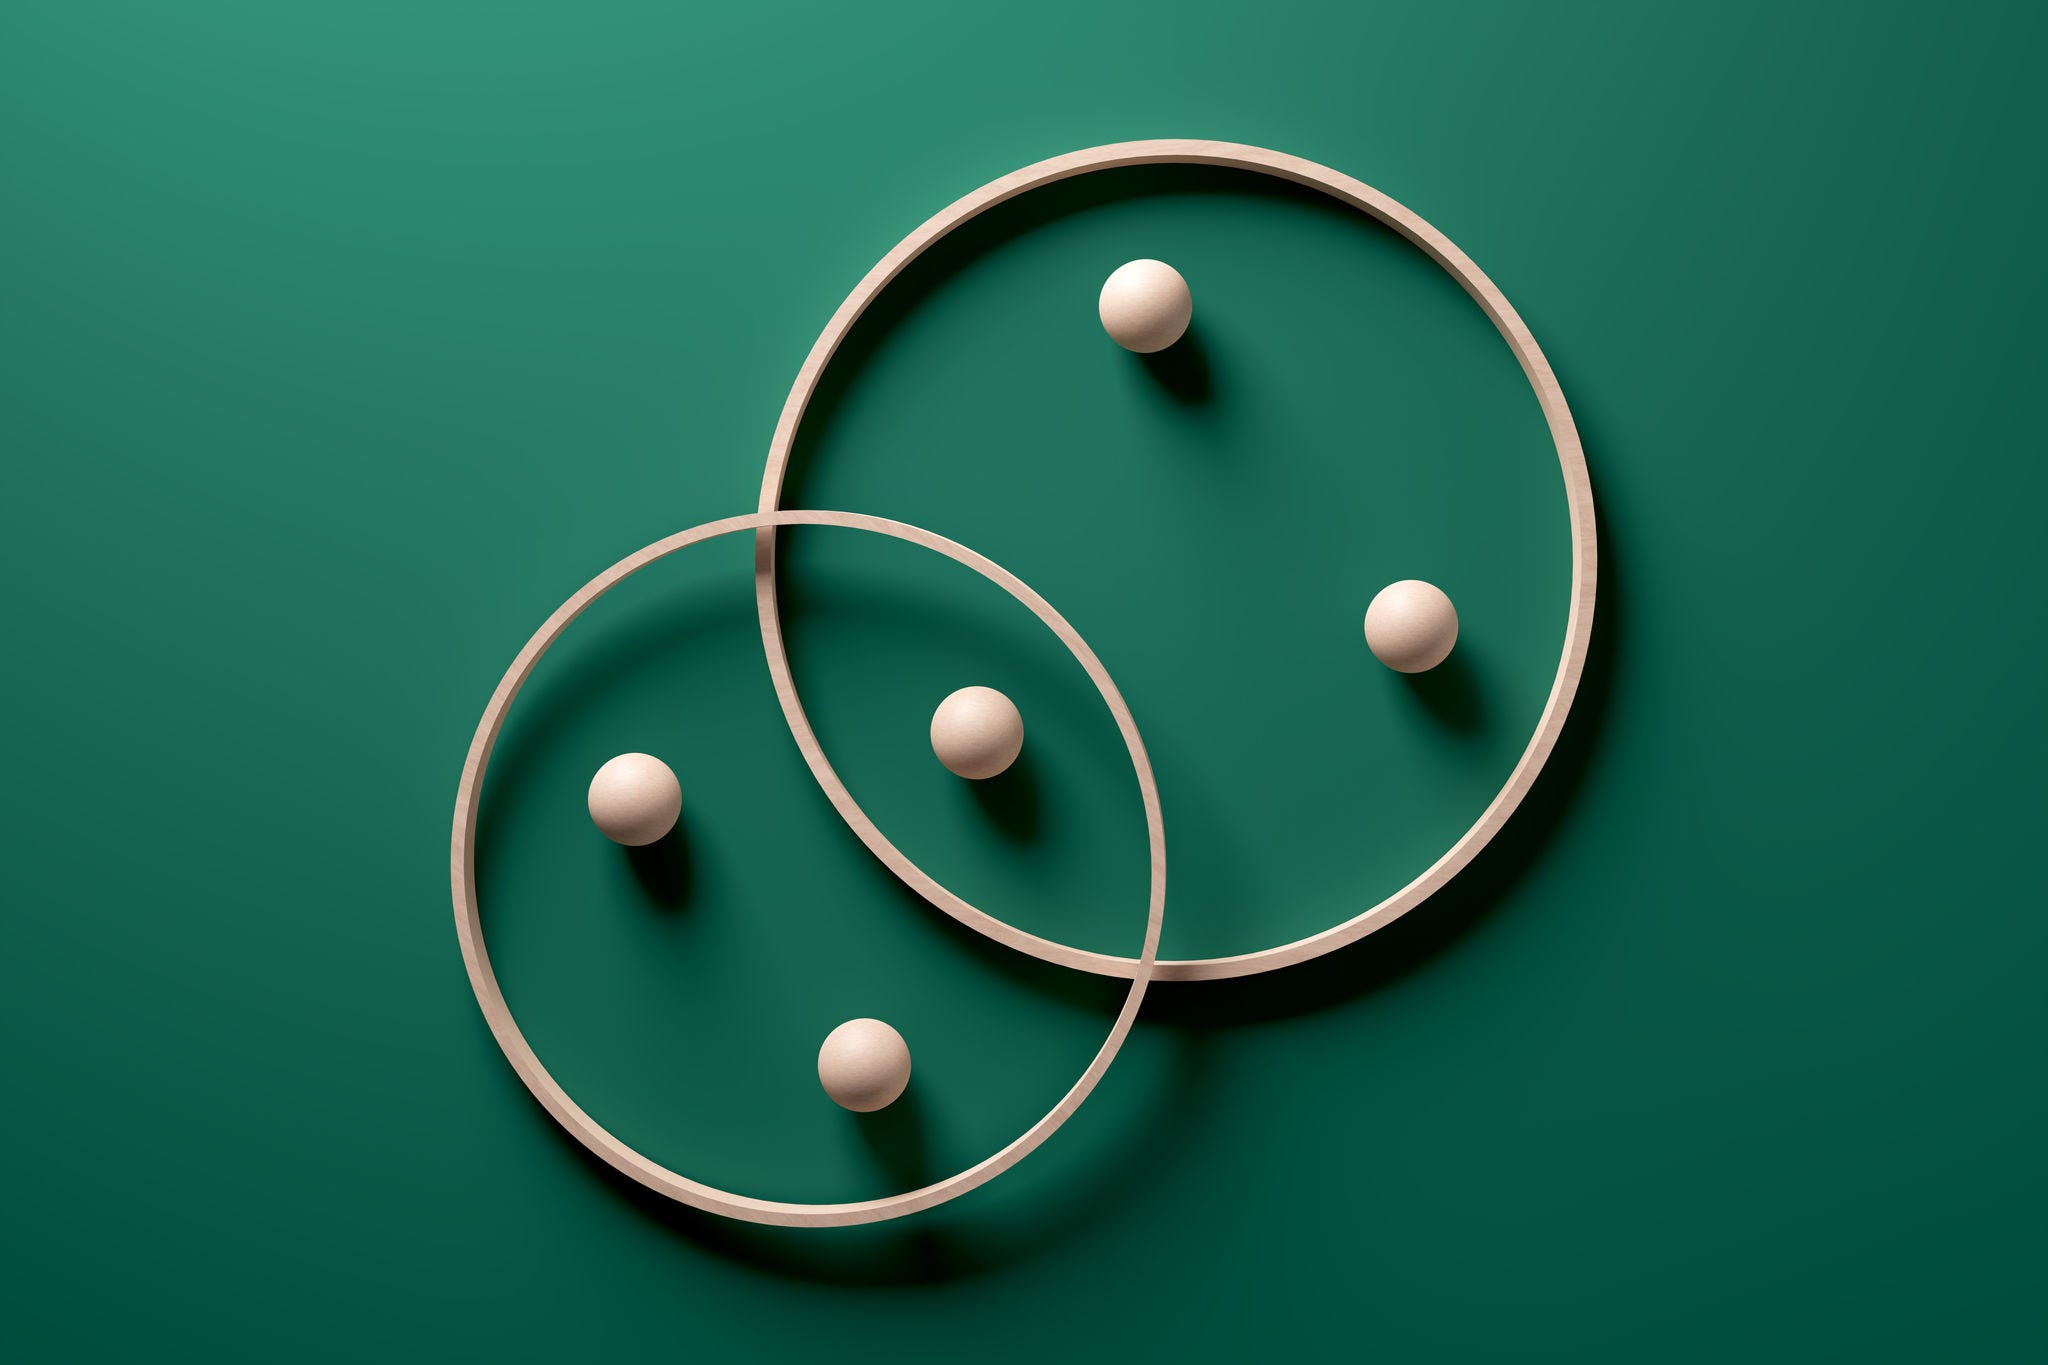 Crossing wooden rings with spheres on green background. Modern abstract art with geometric shapes. 3d rendering.